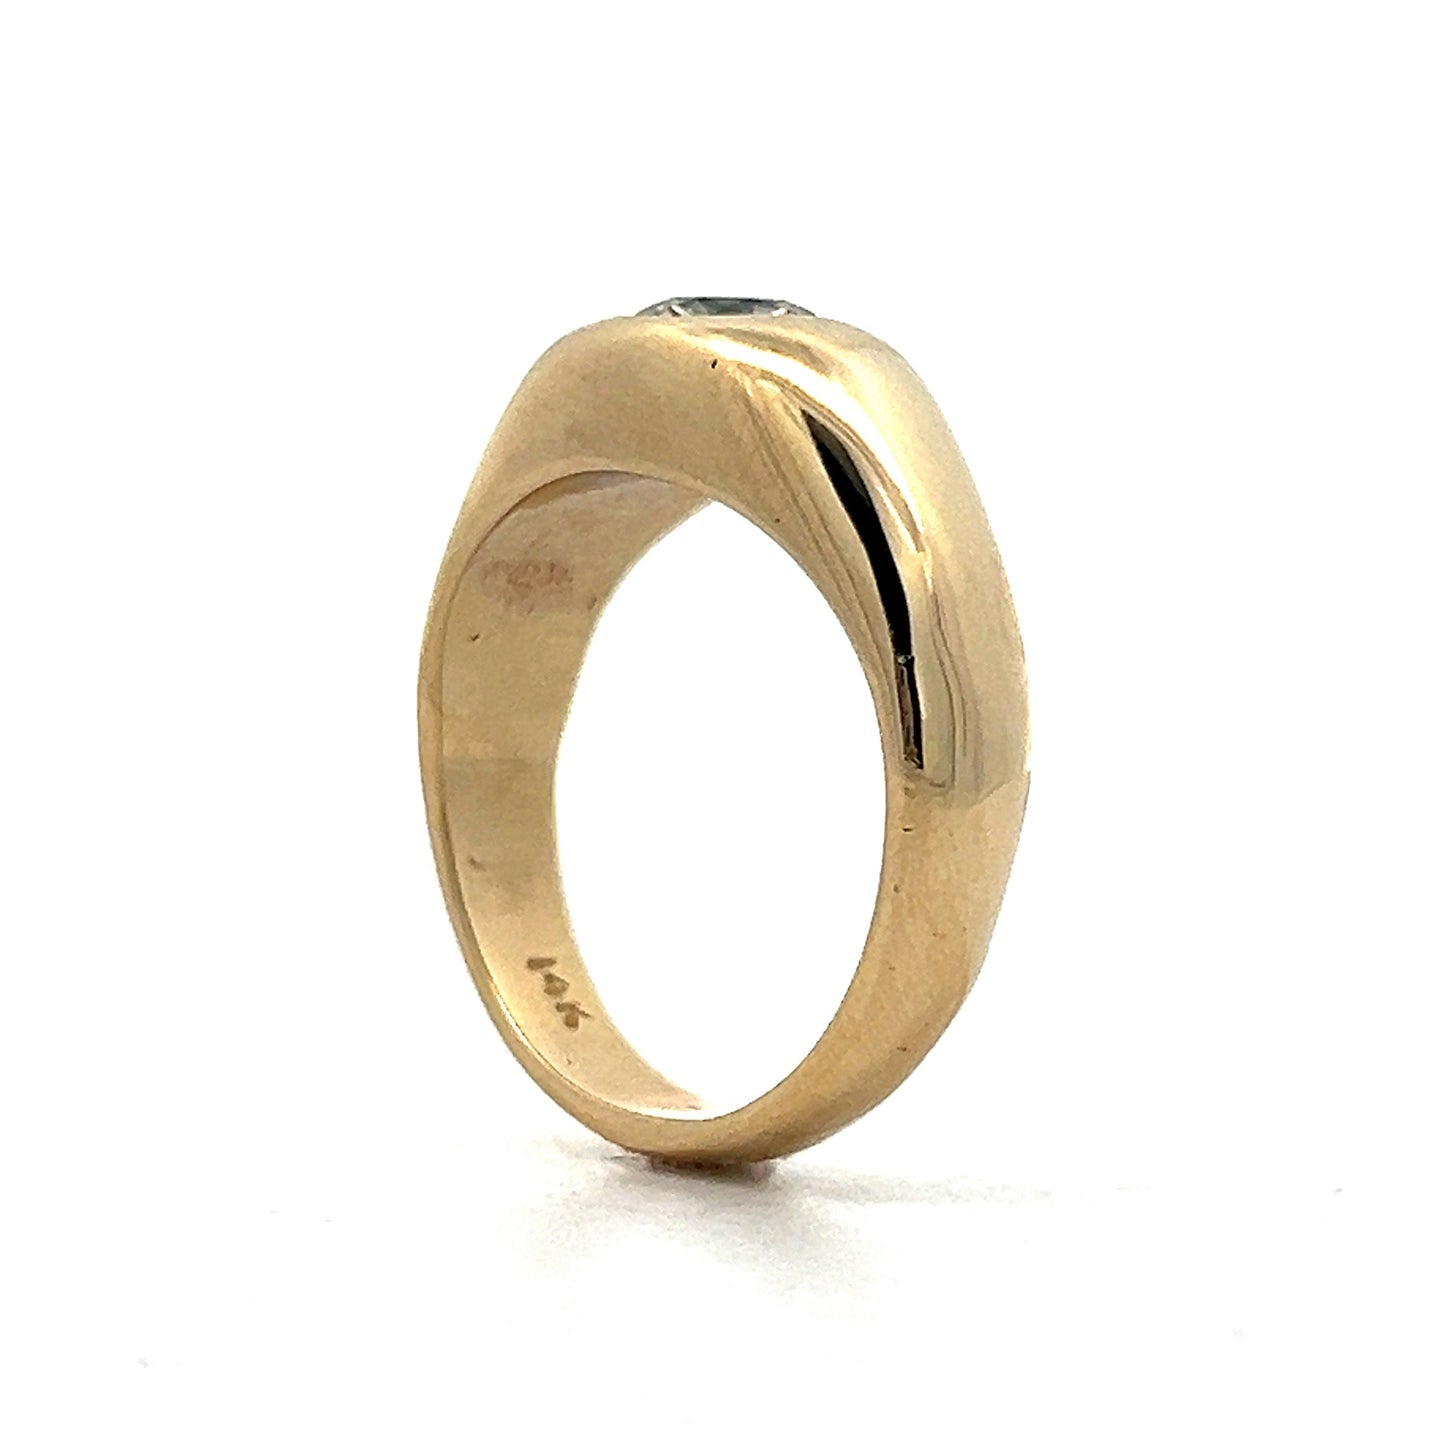 .76 Vintage Mid-Century Cocktail Ring in 14k Yellow Gold